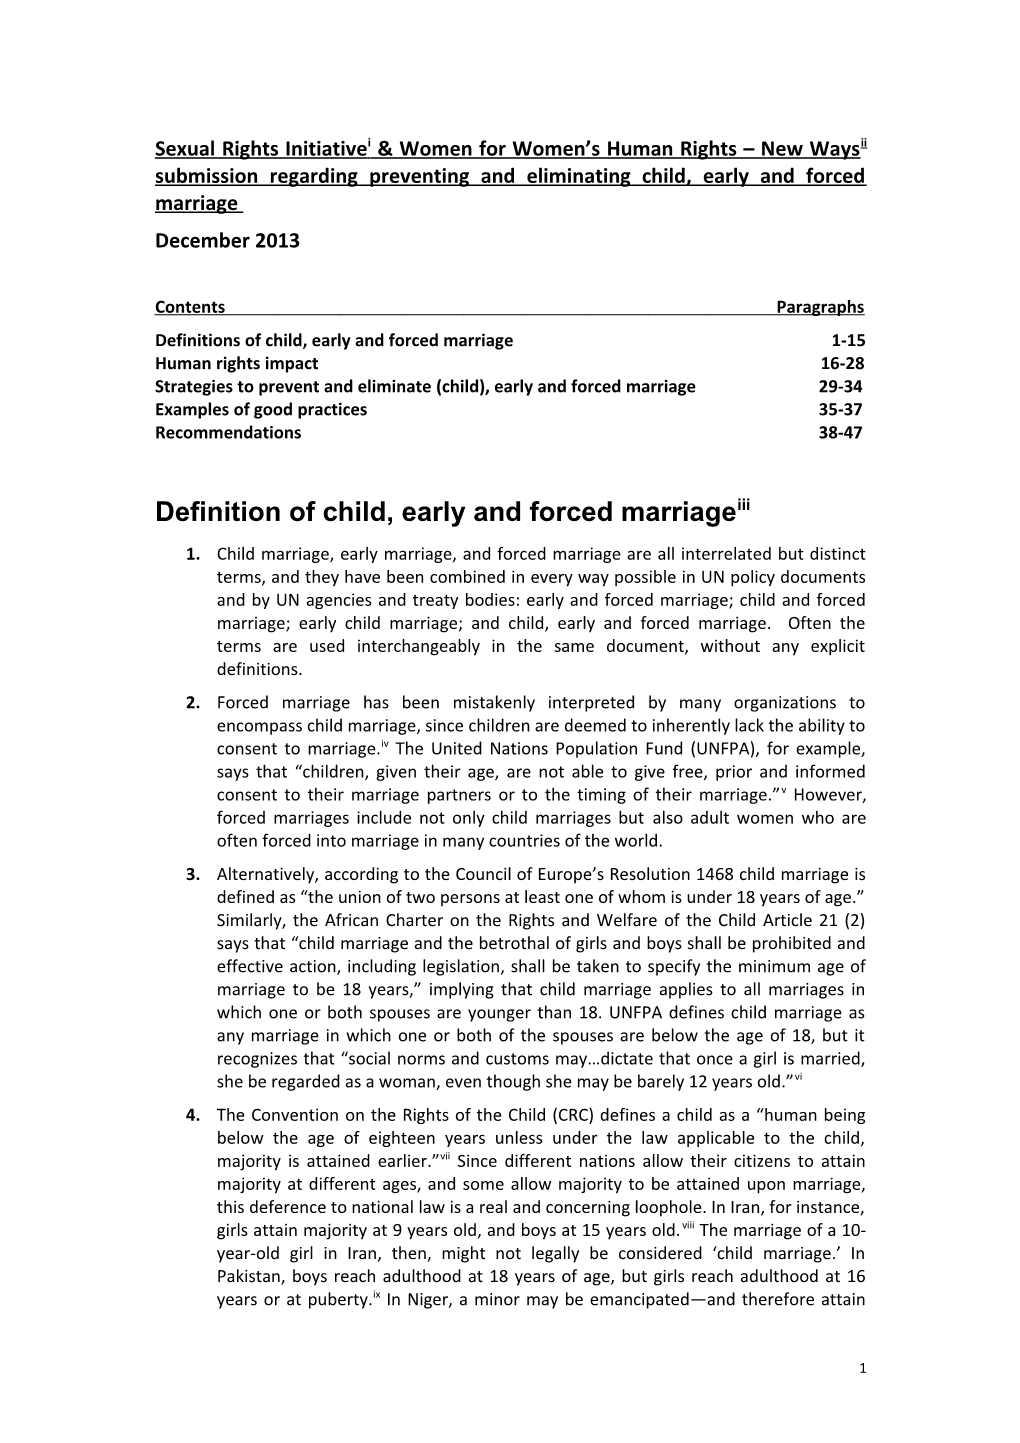 Pursuant to HRC Resolution A/HRC/RES/24/23 on Child, Early and Forced Marriage, OHCHR